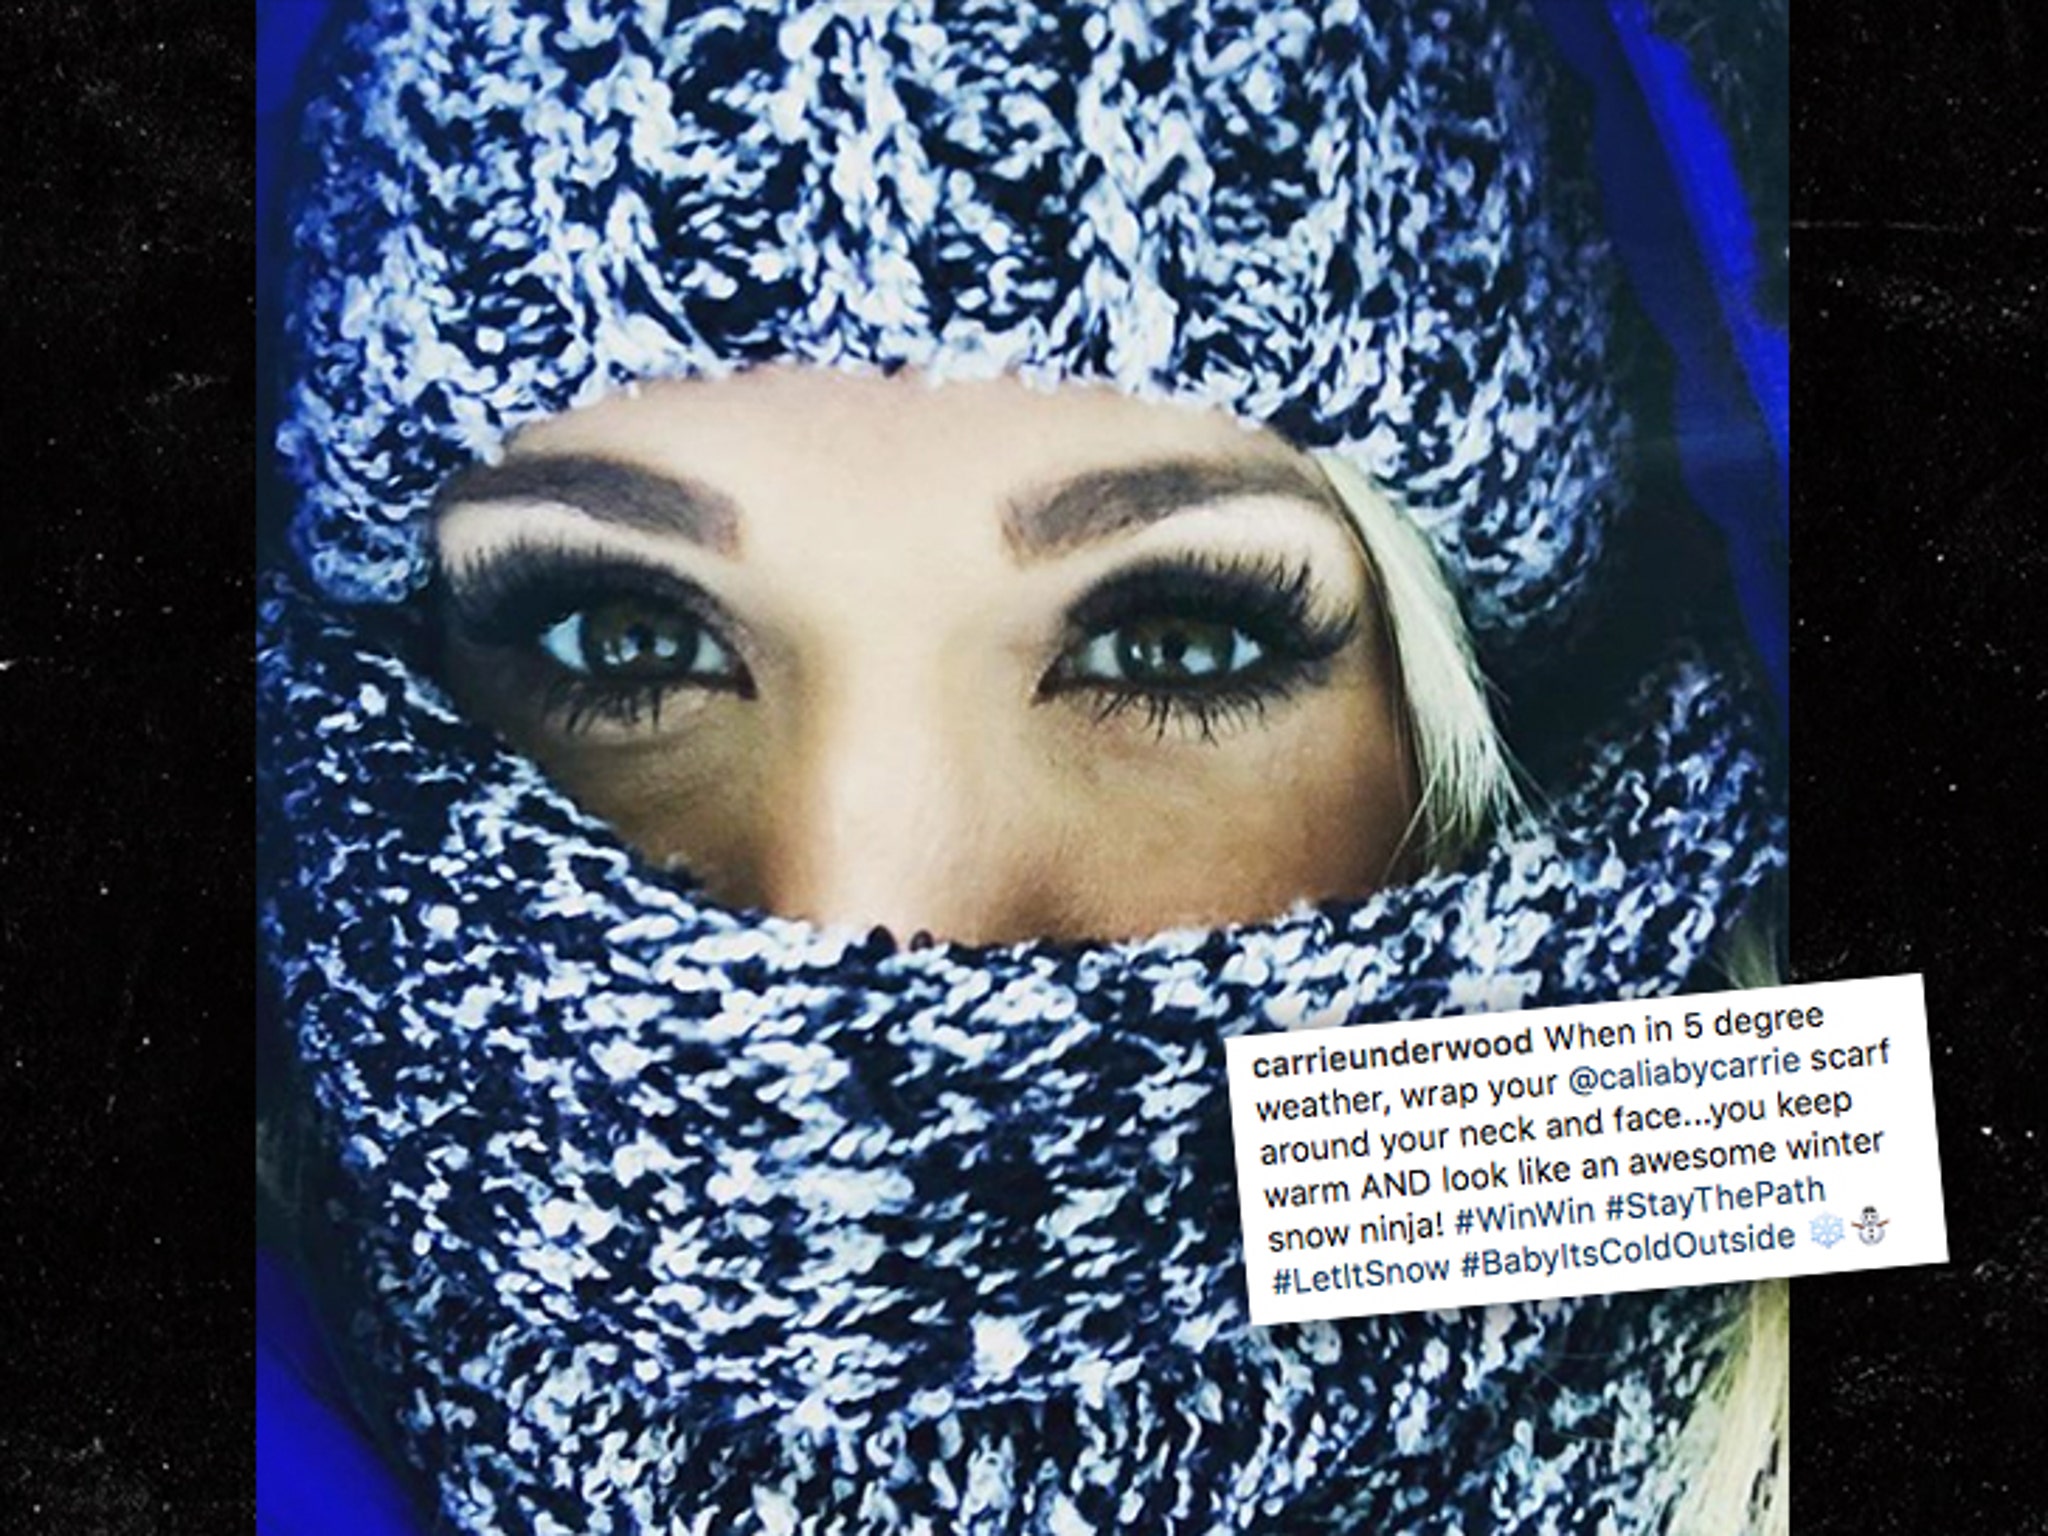 Carrie Underwood Required More Than 40 Stitches in Her Face After Fall